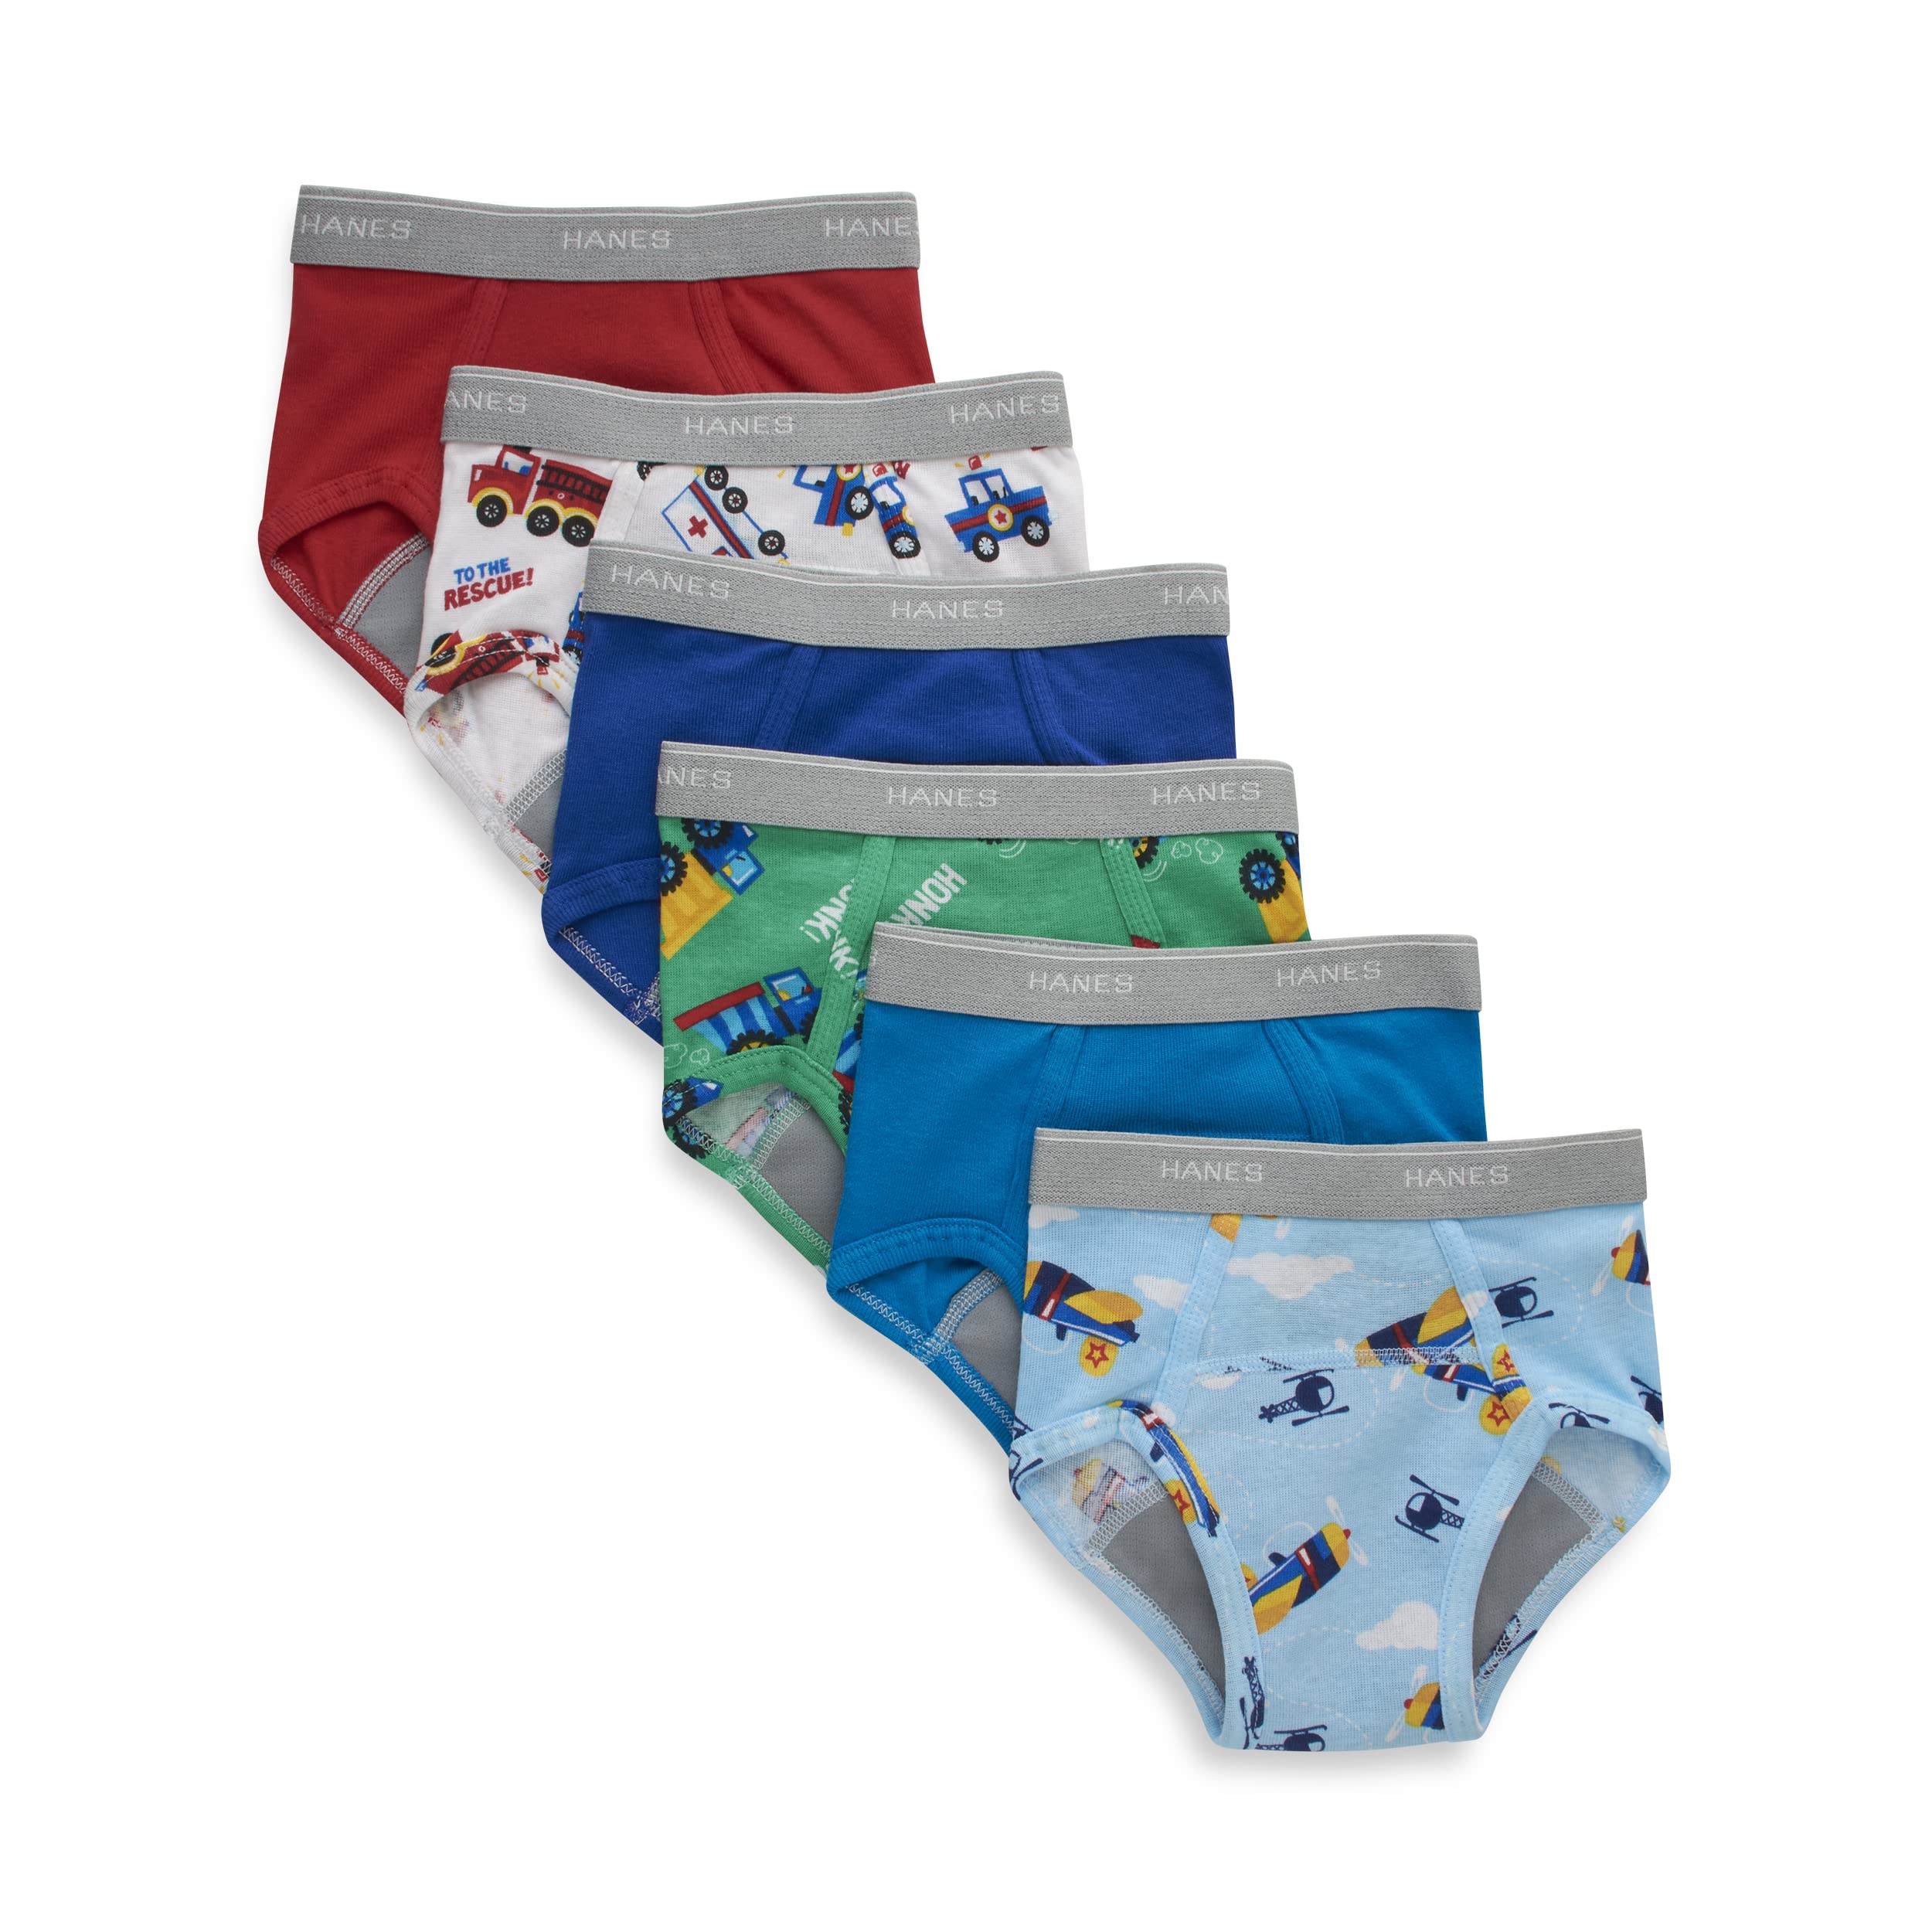 Hanes Toddler Boys Potty Trainer Briefs 6-Pack